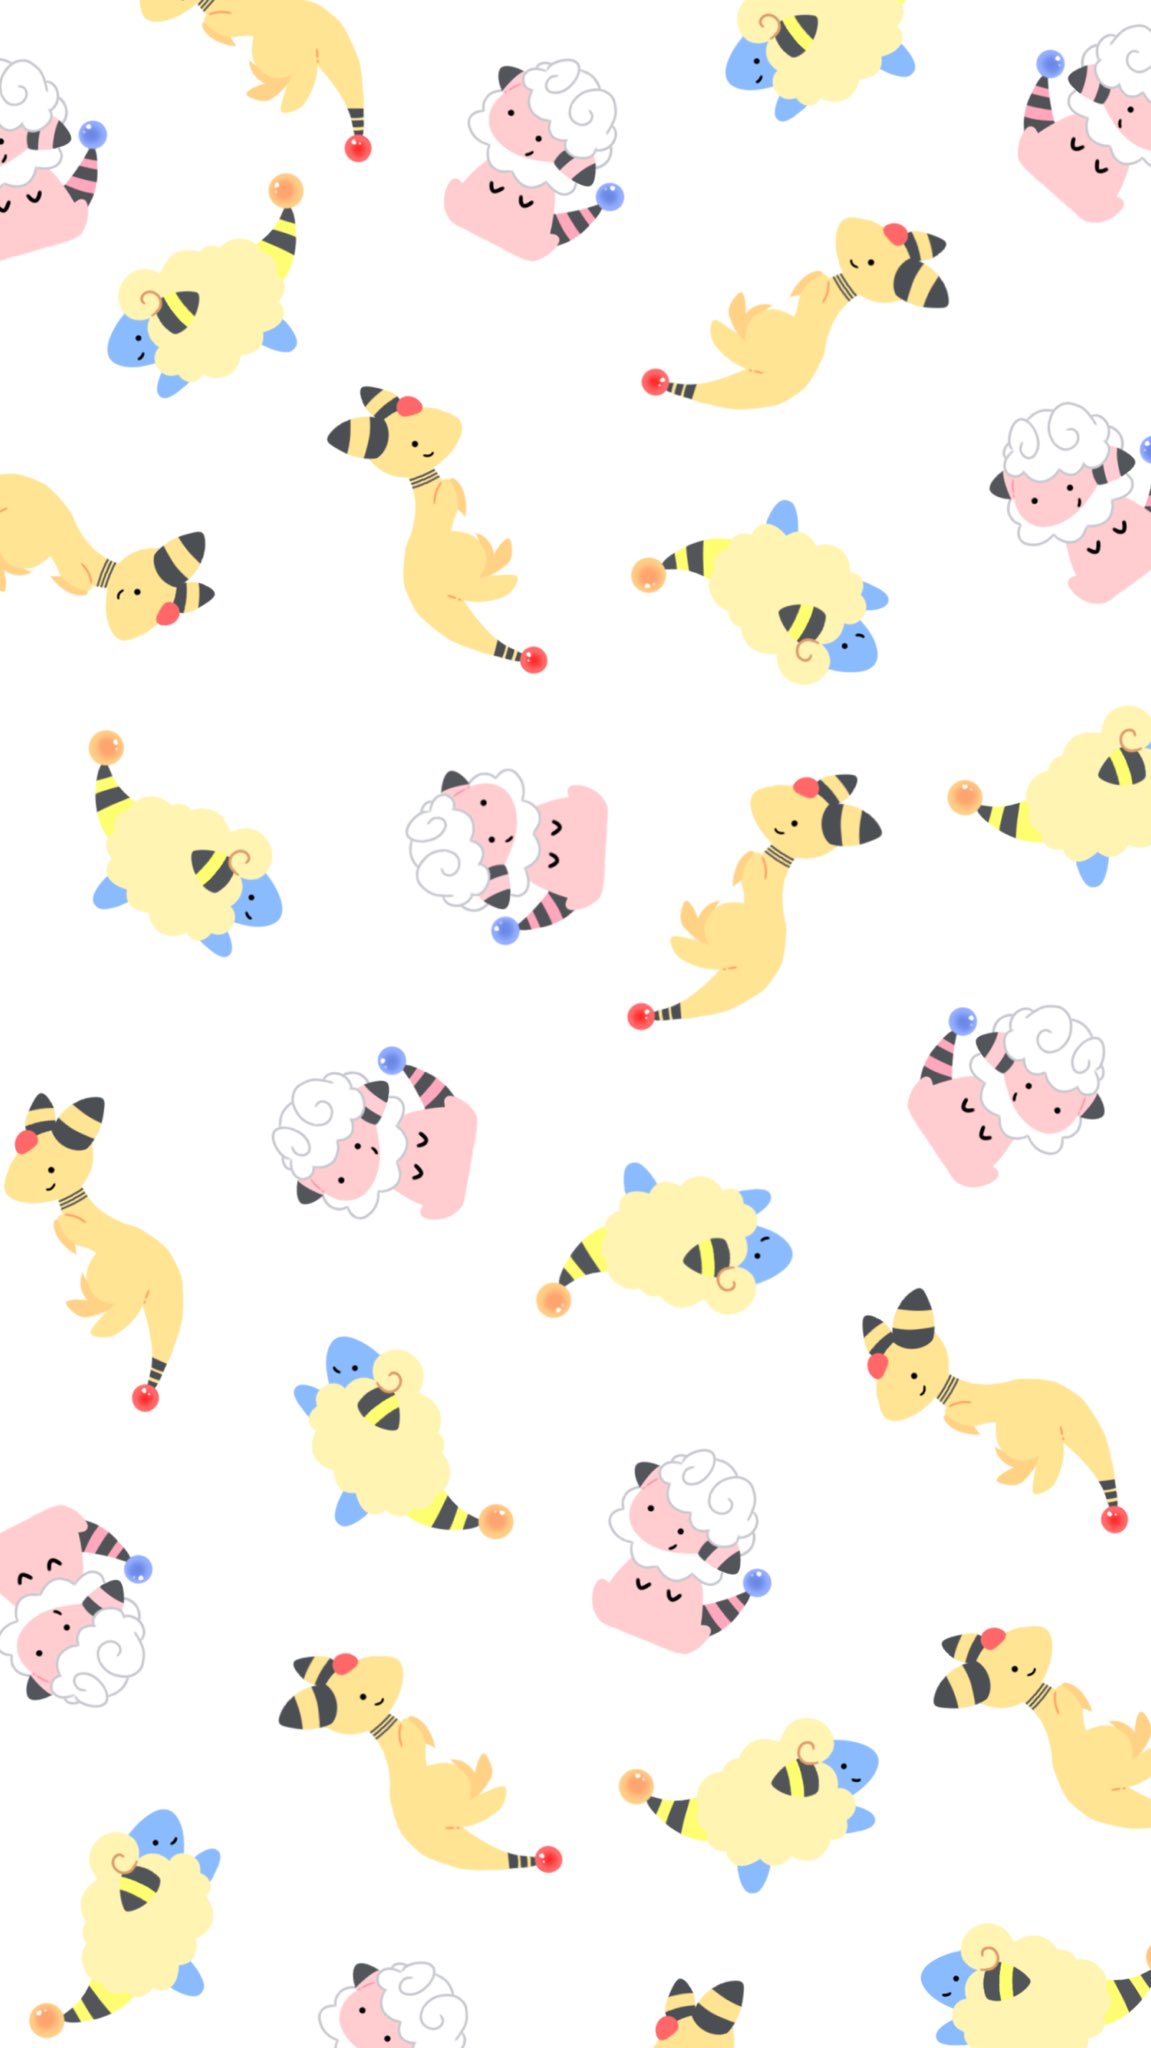 Pokejungle Gen Ix Check Out These Adorable Mobile Wallpapers Created By A Japanese Fan I Recommend Checking Out Their Profile For More Great Art You Can Use On Your Phone